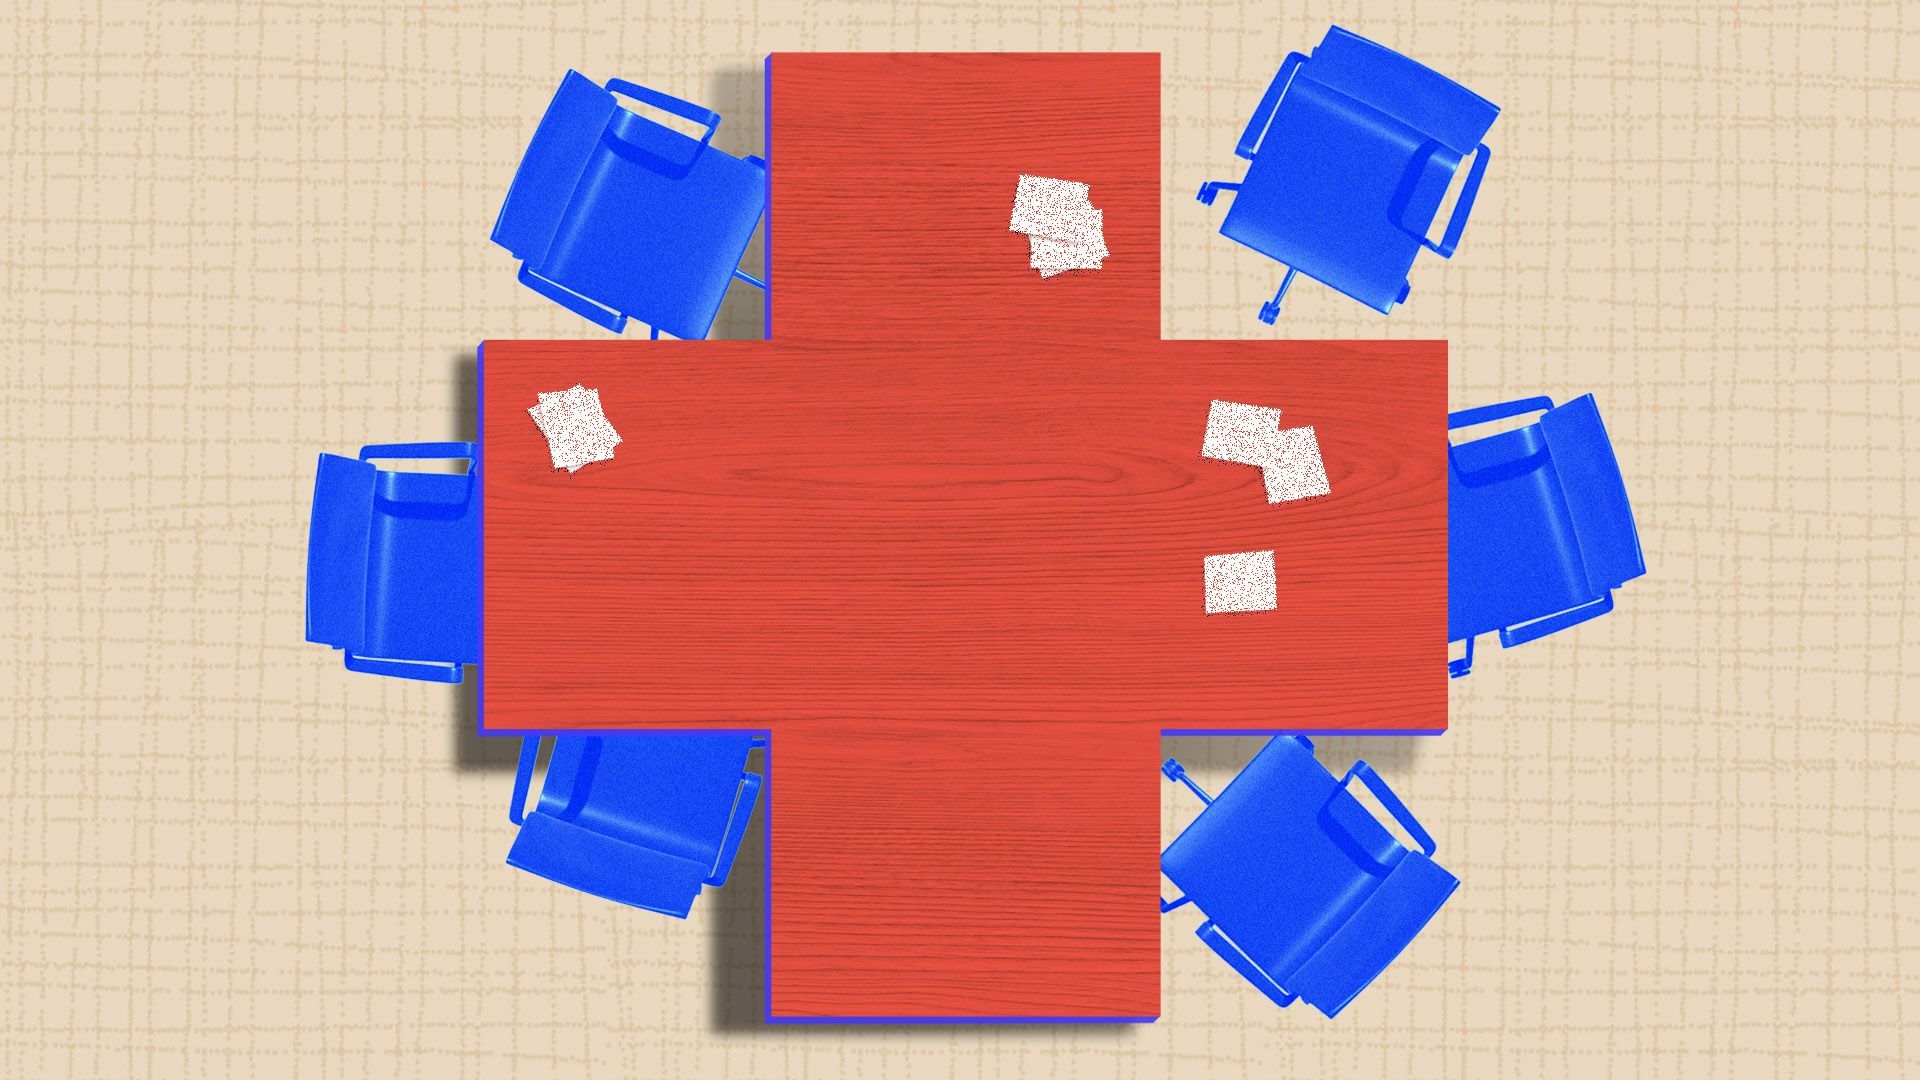 Illustration of a conference table shaped like a red cross with chairs around it